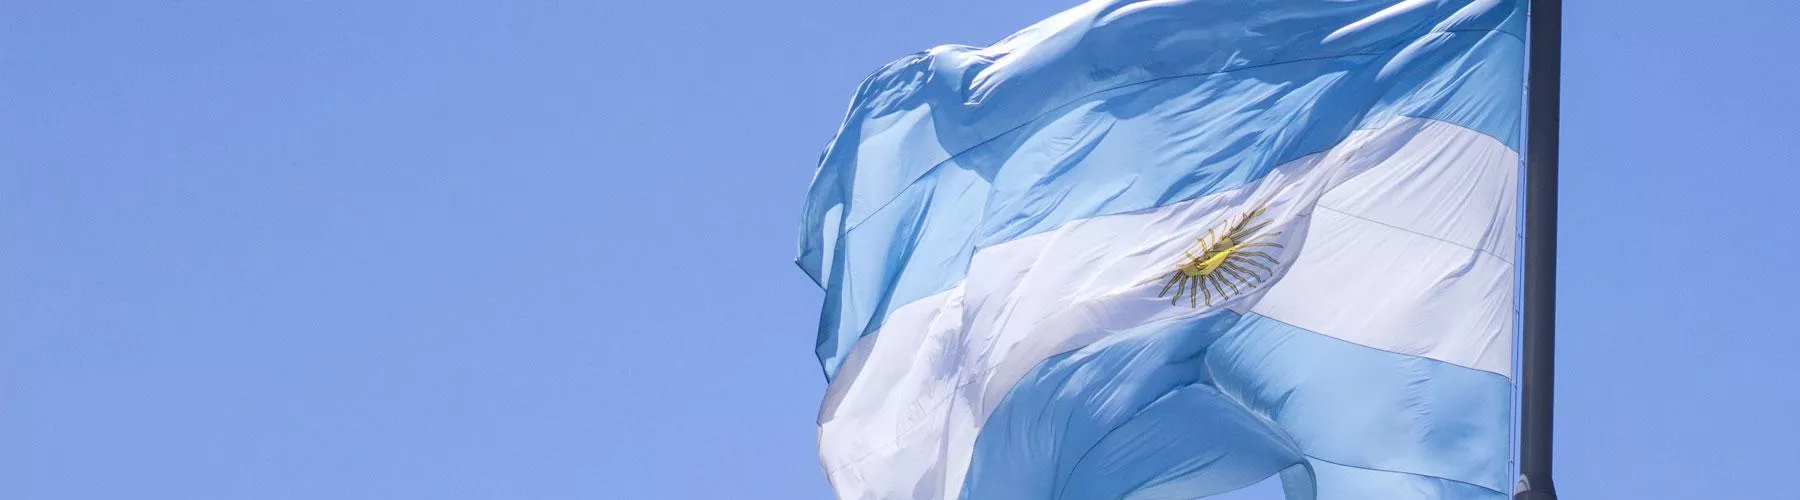 The Argentine flag flies in the wind